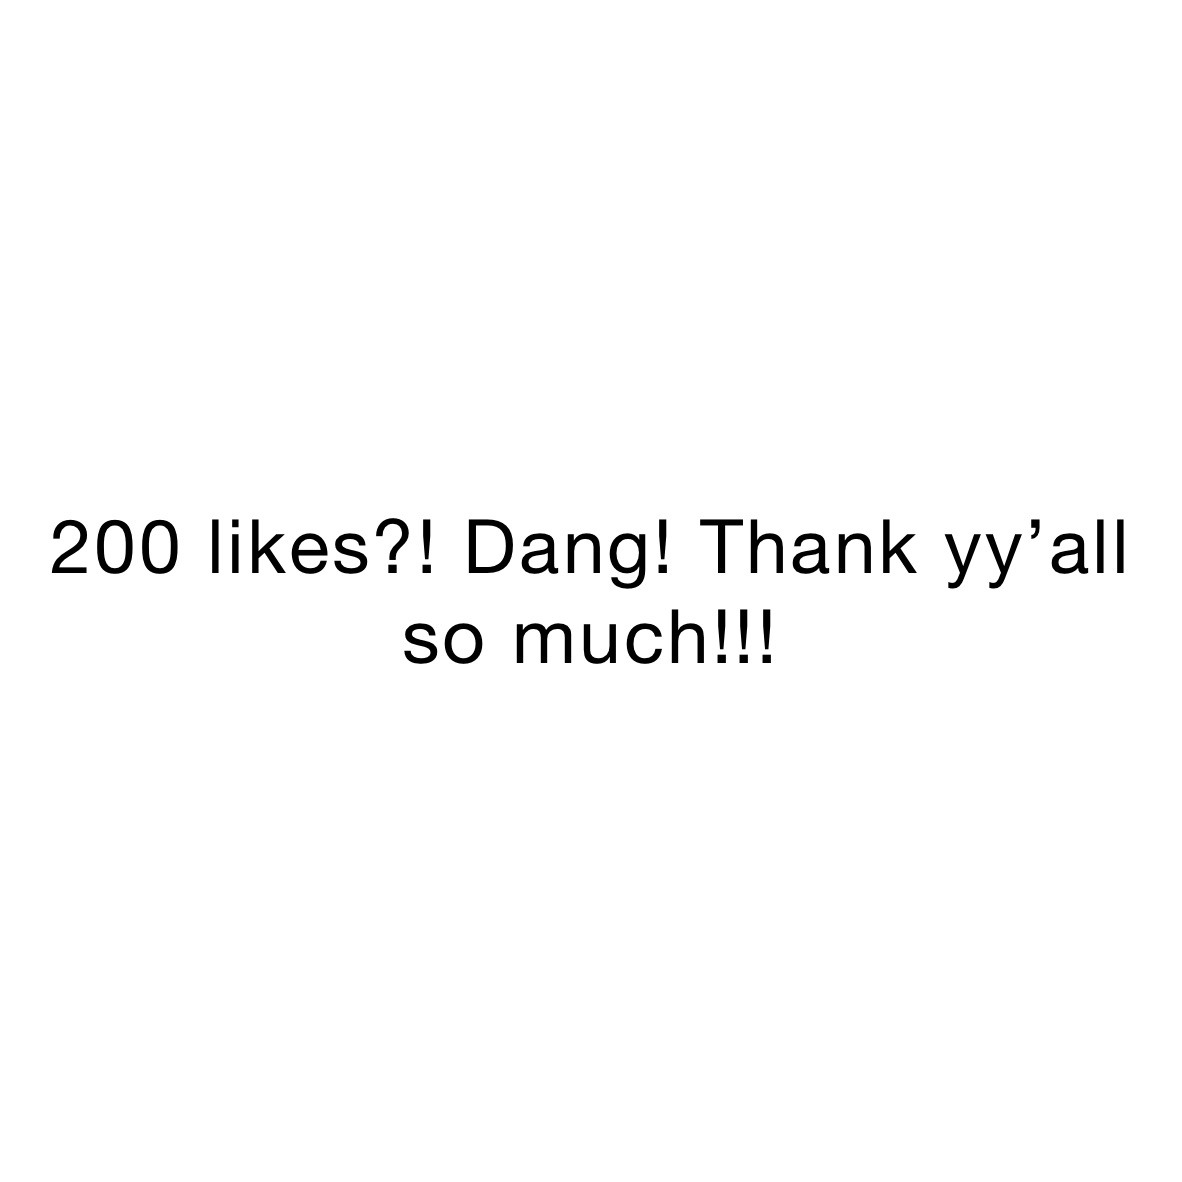 200 likes?! Dang! Thank yy’all so much!!!